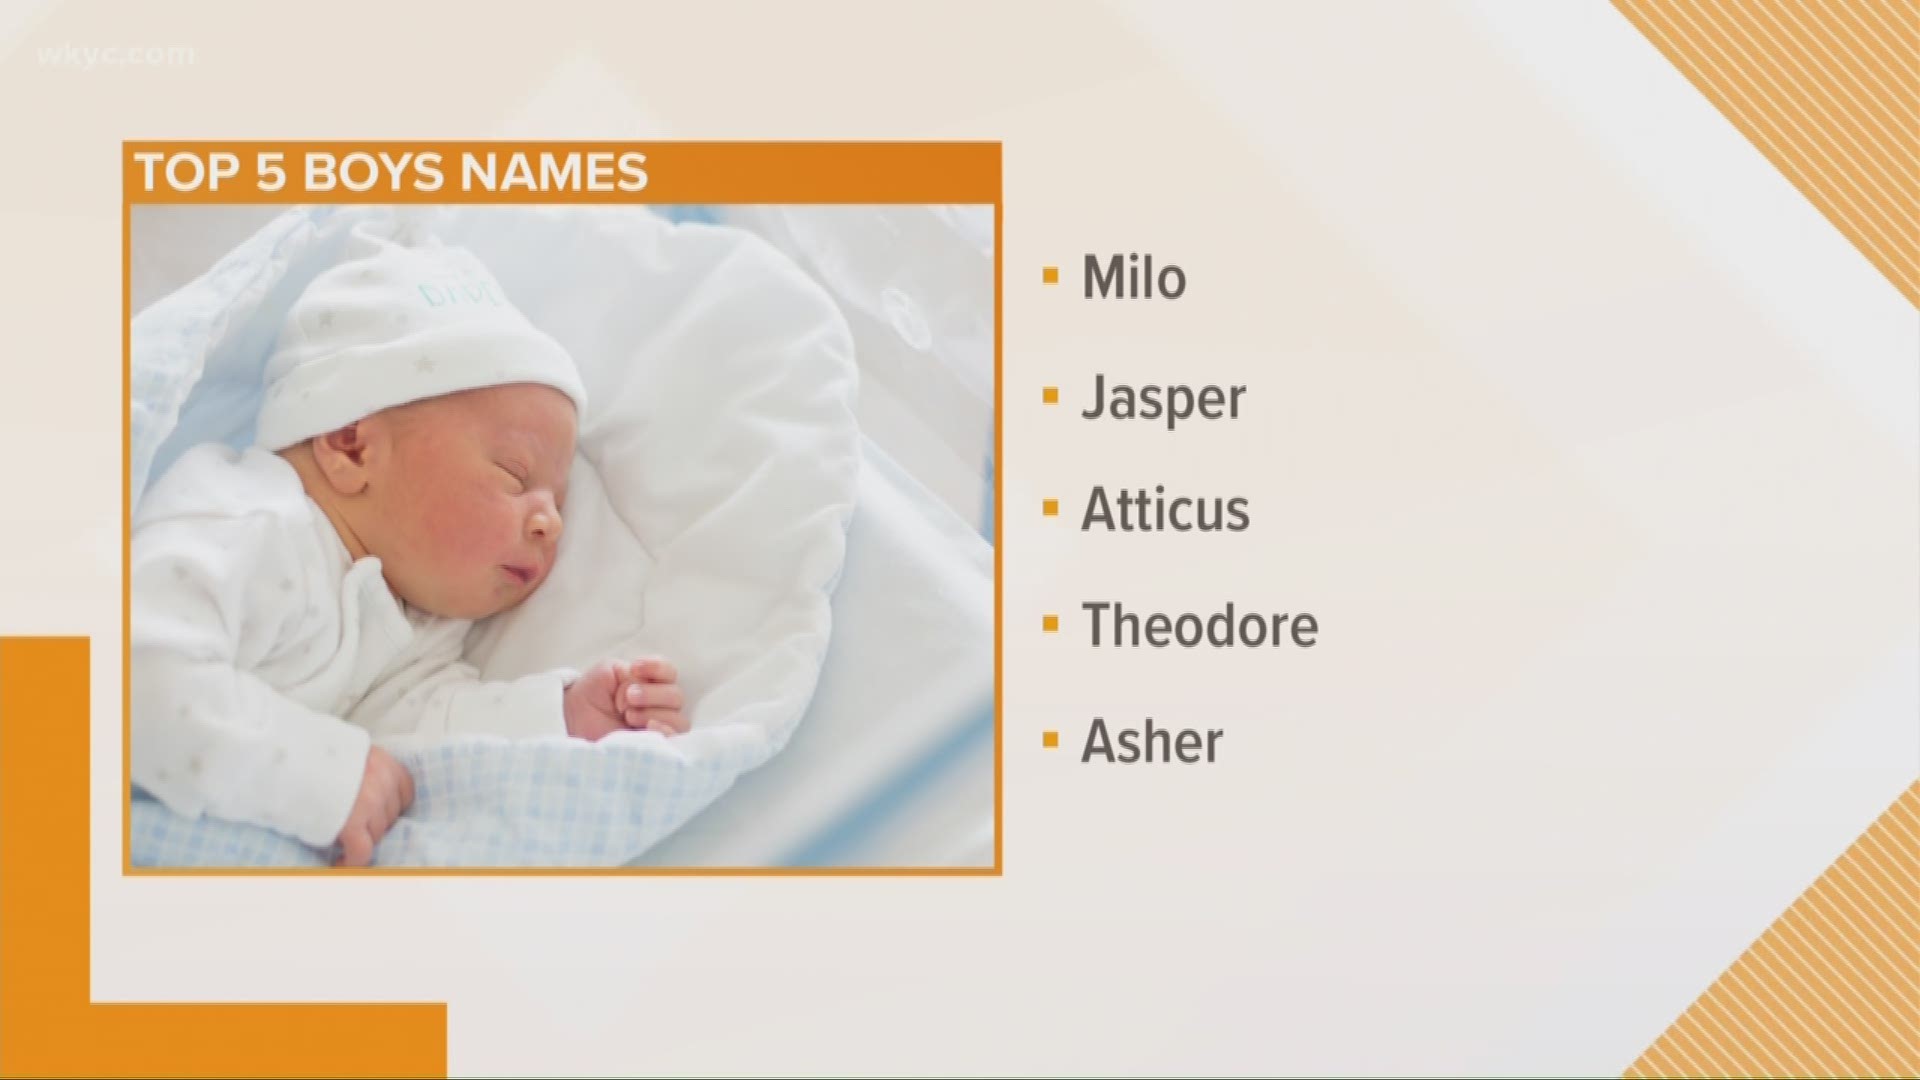 April 3, 2019: Is your baby's name among the most popular?